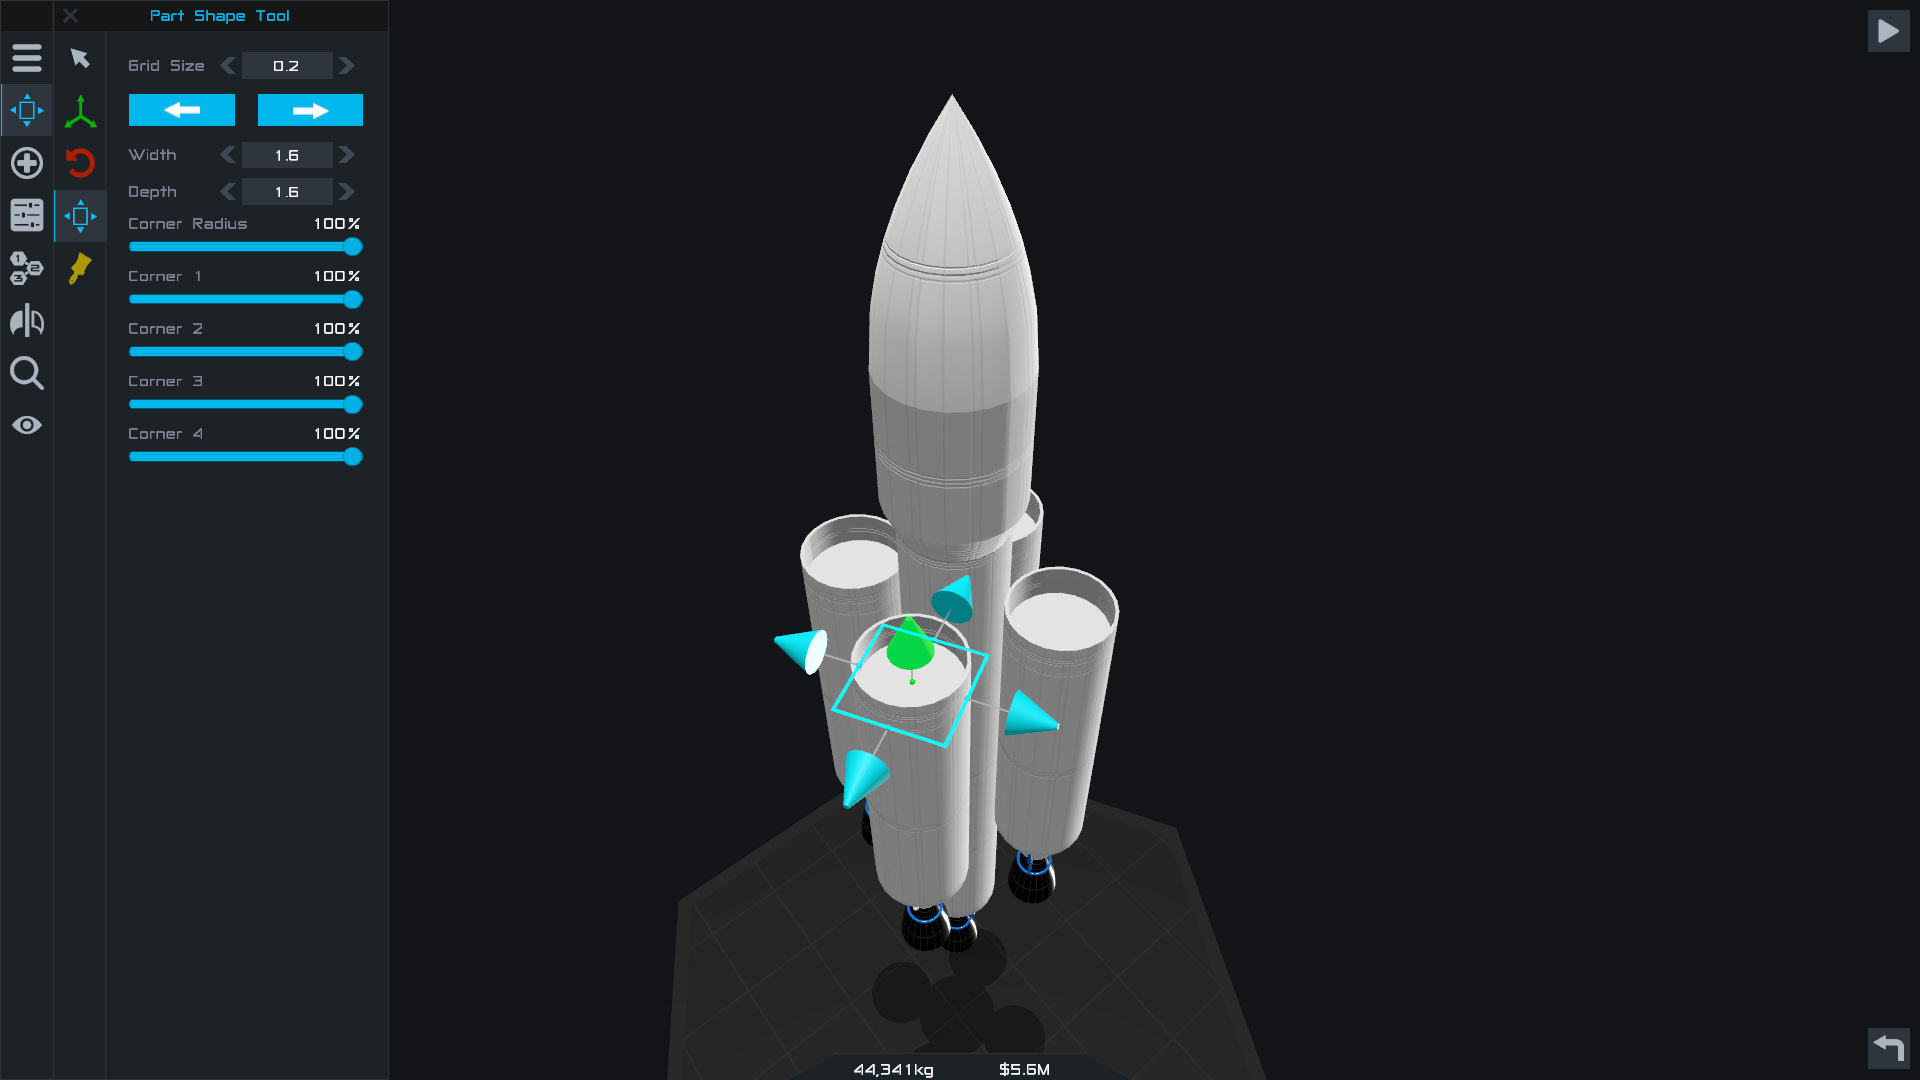 download ksp steam for free